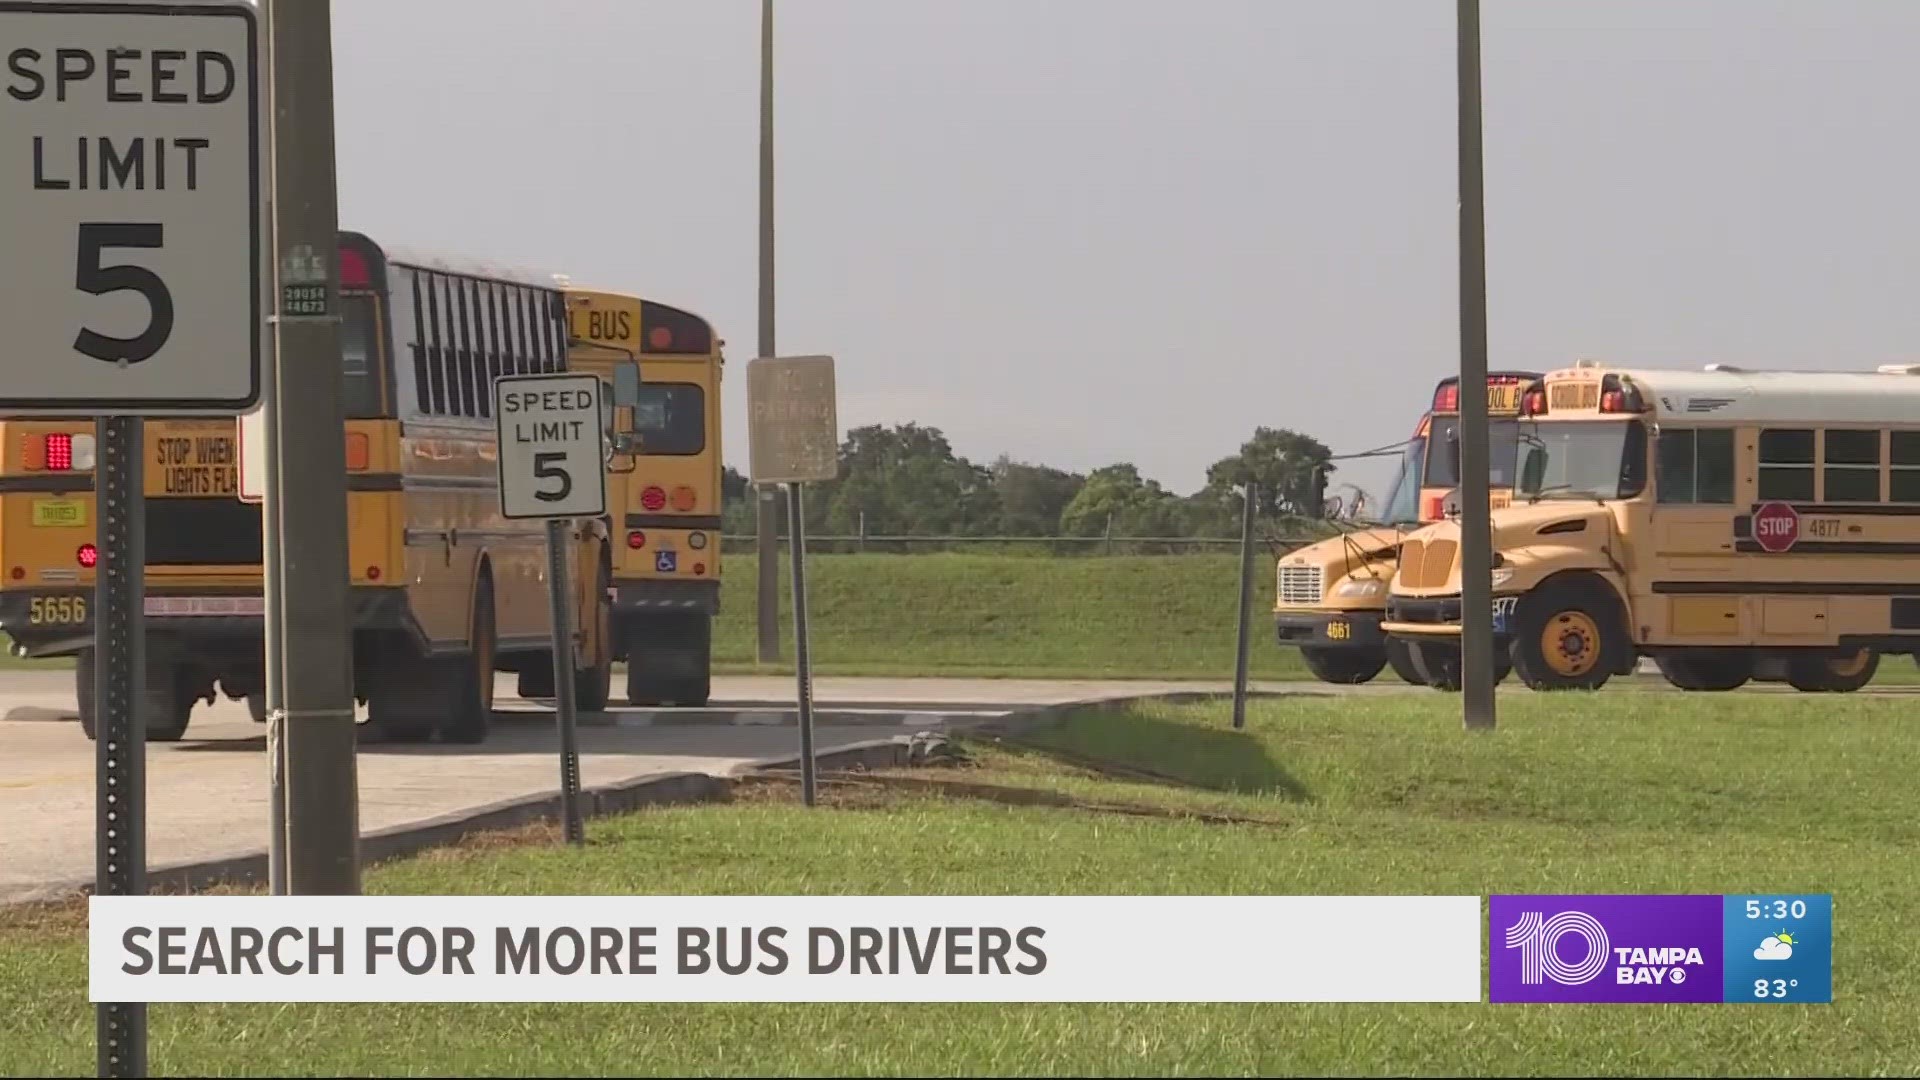 Like many other districts, Hillsborough County Public Schools continues to be impacted by the nationwide bus driver shortage.